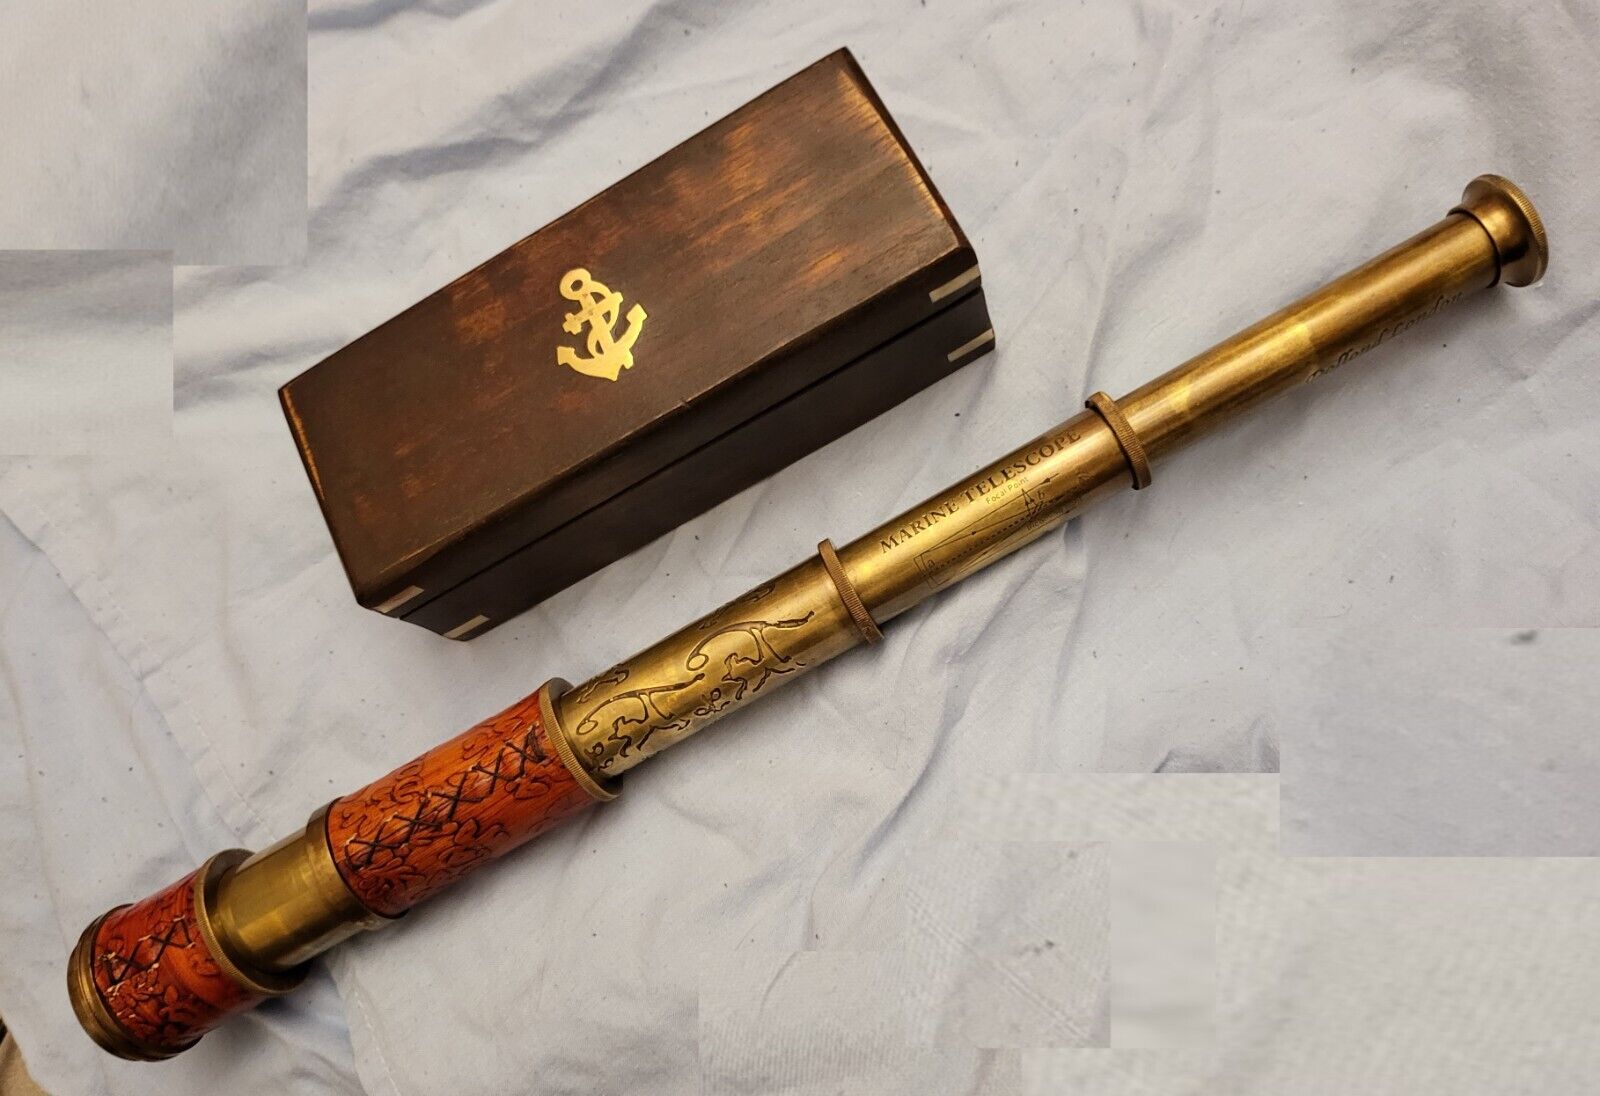 Vintage Telescope Antique Astronomy Space Stars Old Gold Lustre Wooden Box Retro